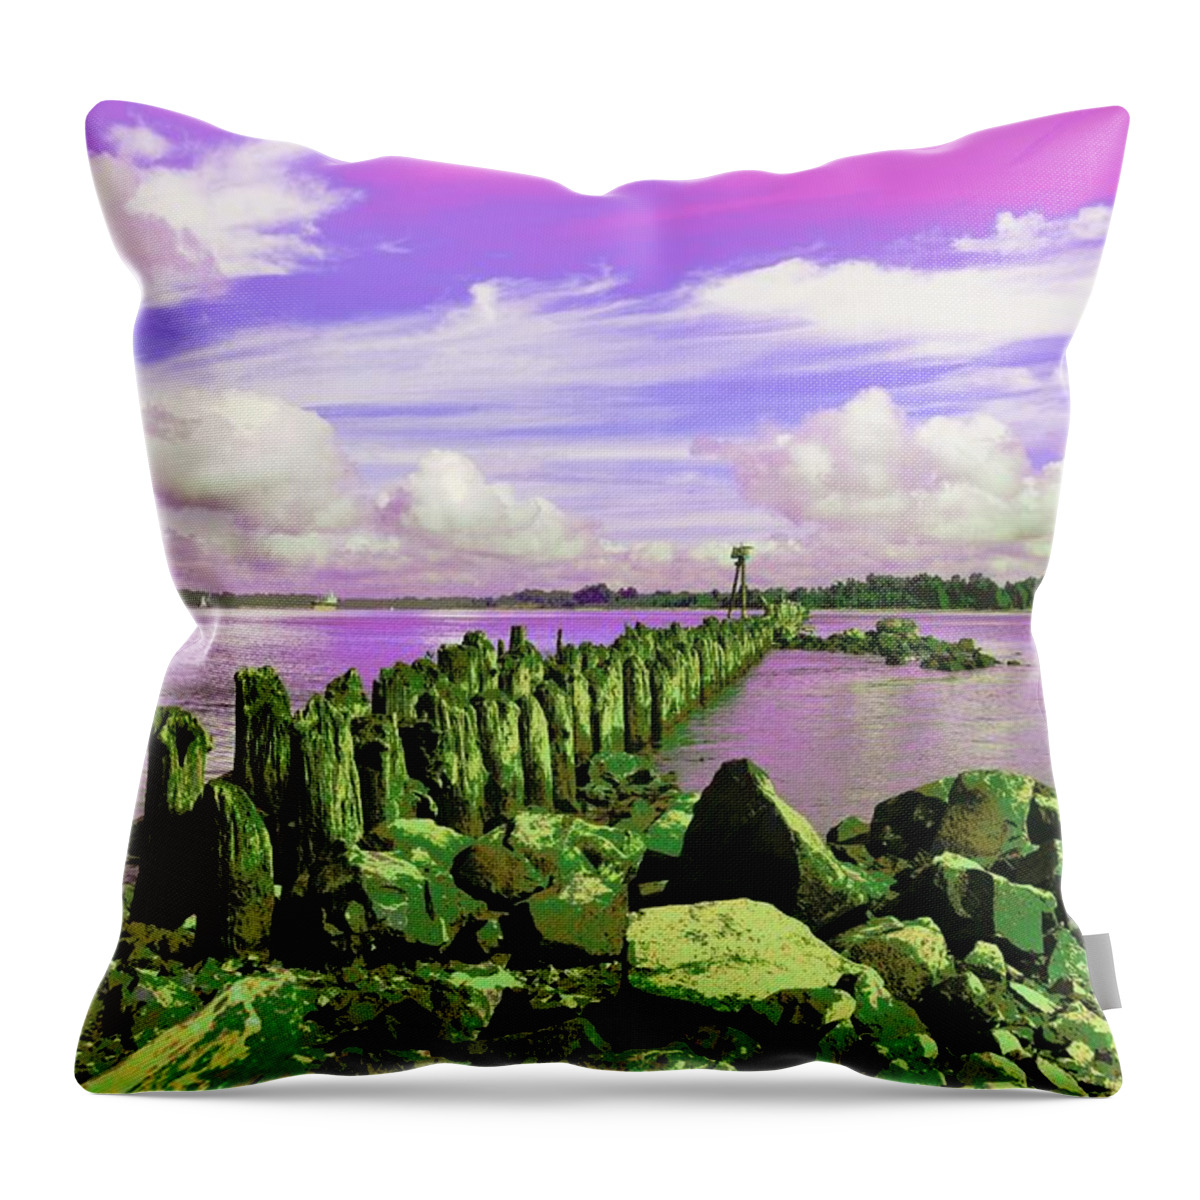 Kelley Point Park Throw Pillow featuring the photograph Avian Outpost by Laureen Murtha Menzl